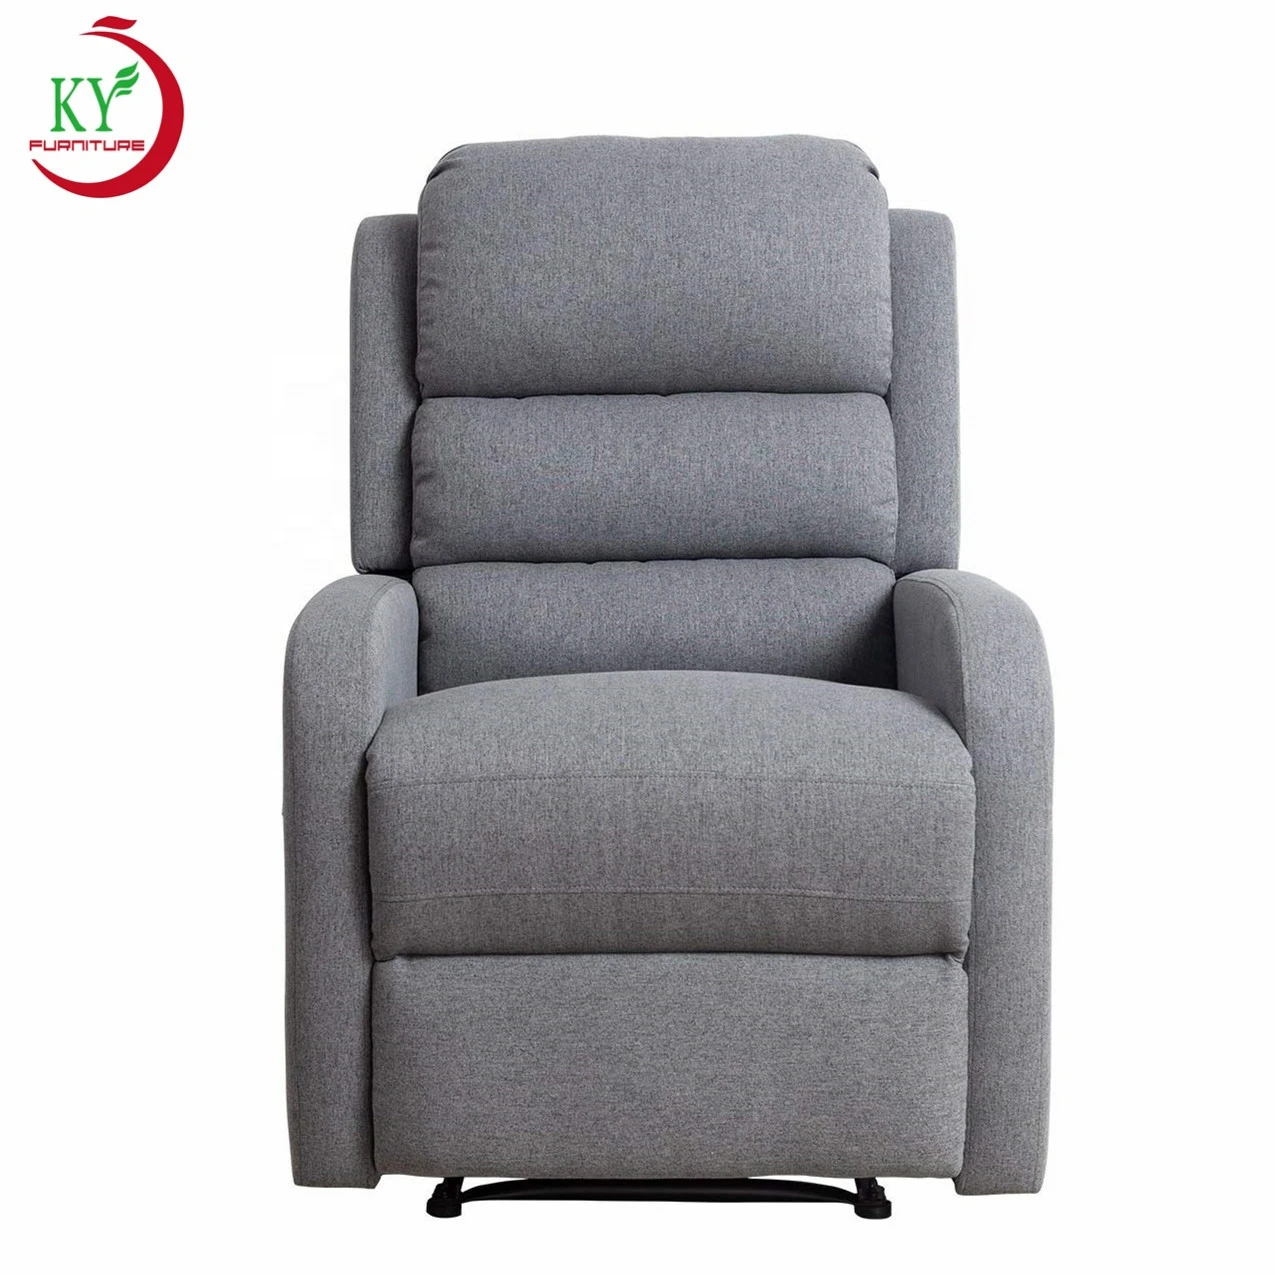 JKY Furniture Modern Design Hot selling Leisure Adjustable Power Electric Recliner Chair Cinema Theater Sofa